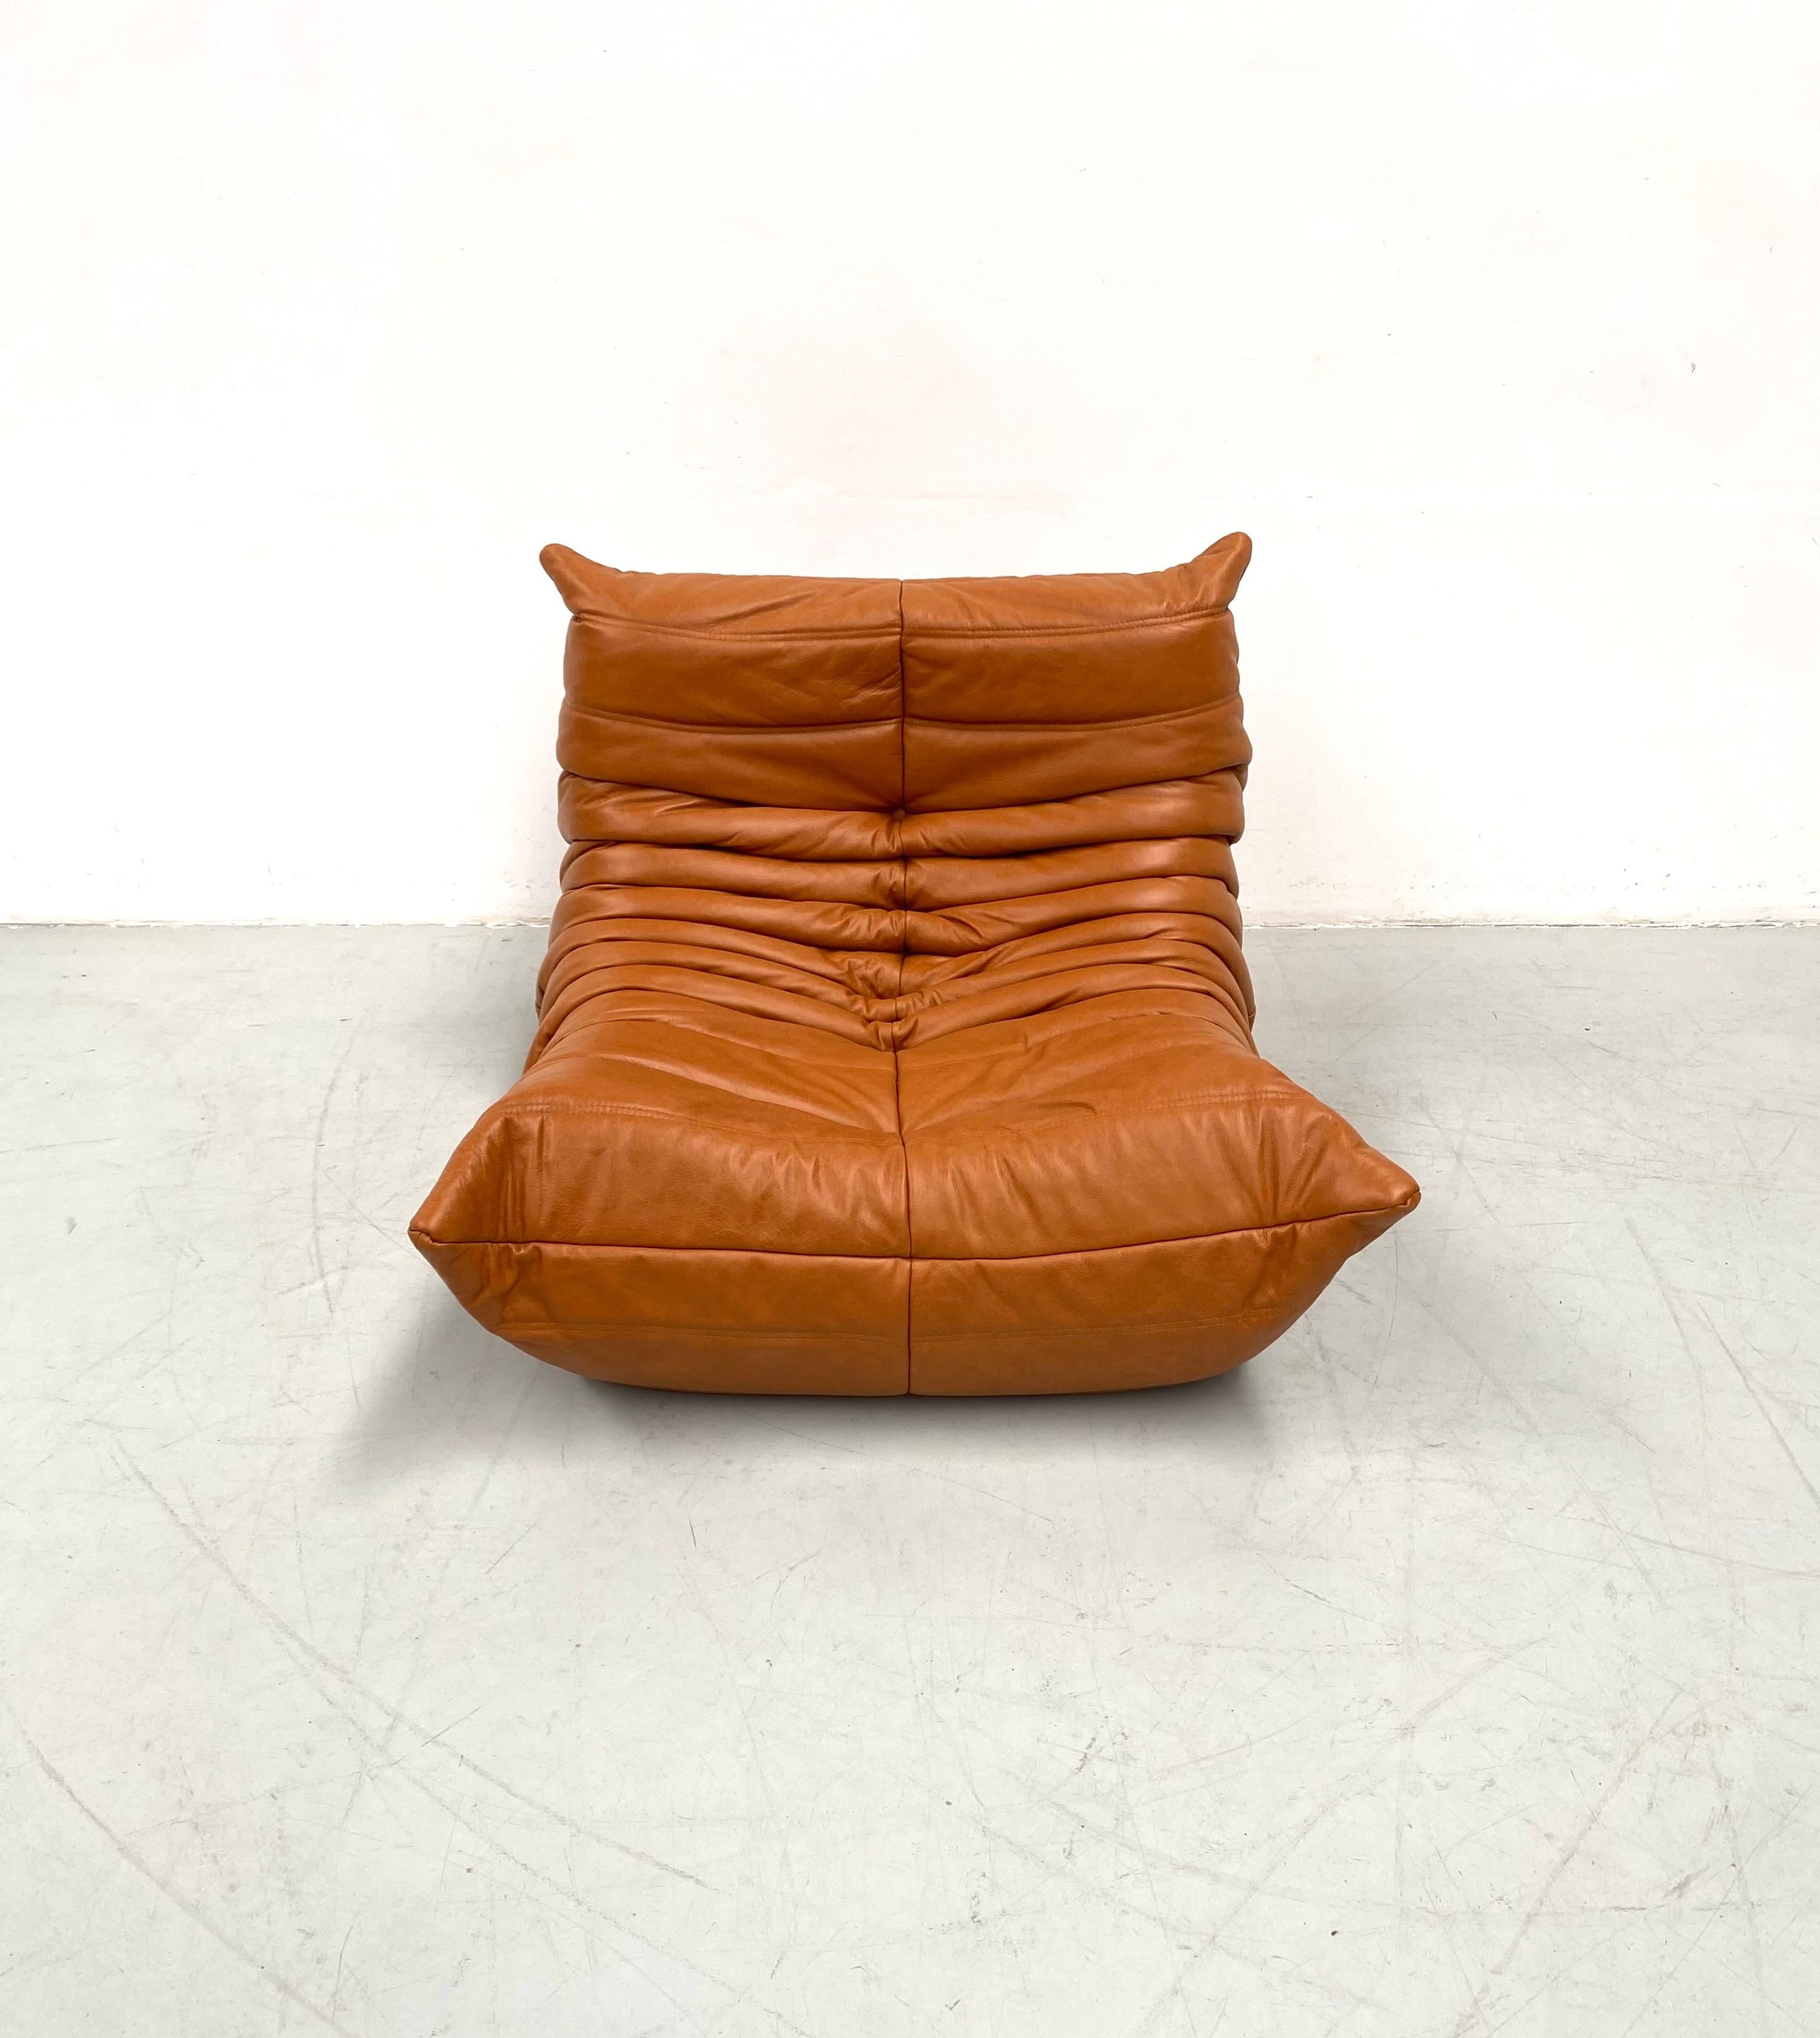 French Vintage Togo Chair in Brown Leather by Michel Ducaroy for Ligne Roset. 1